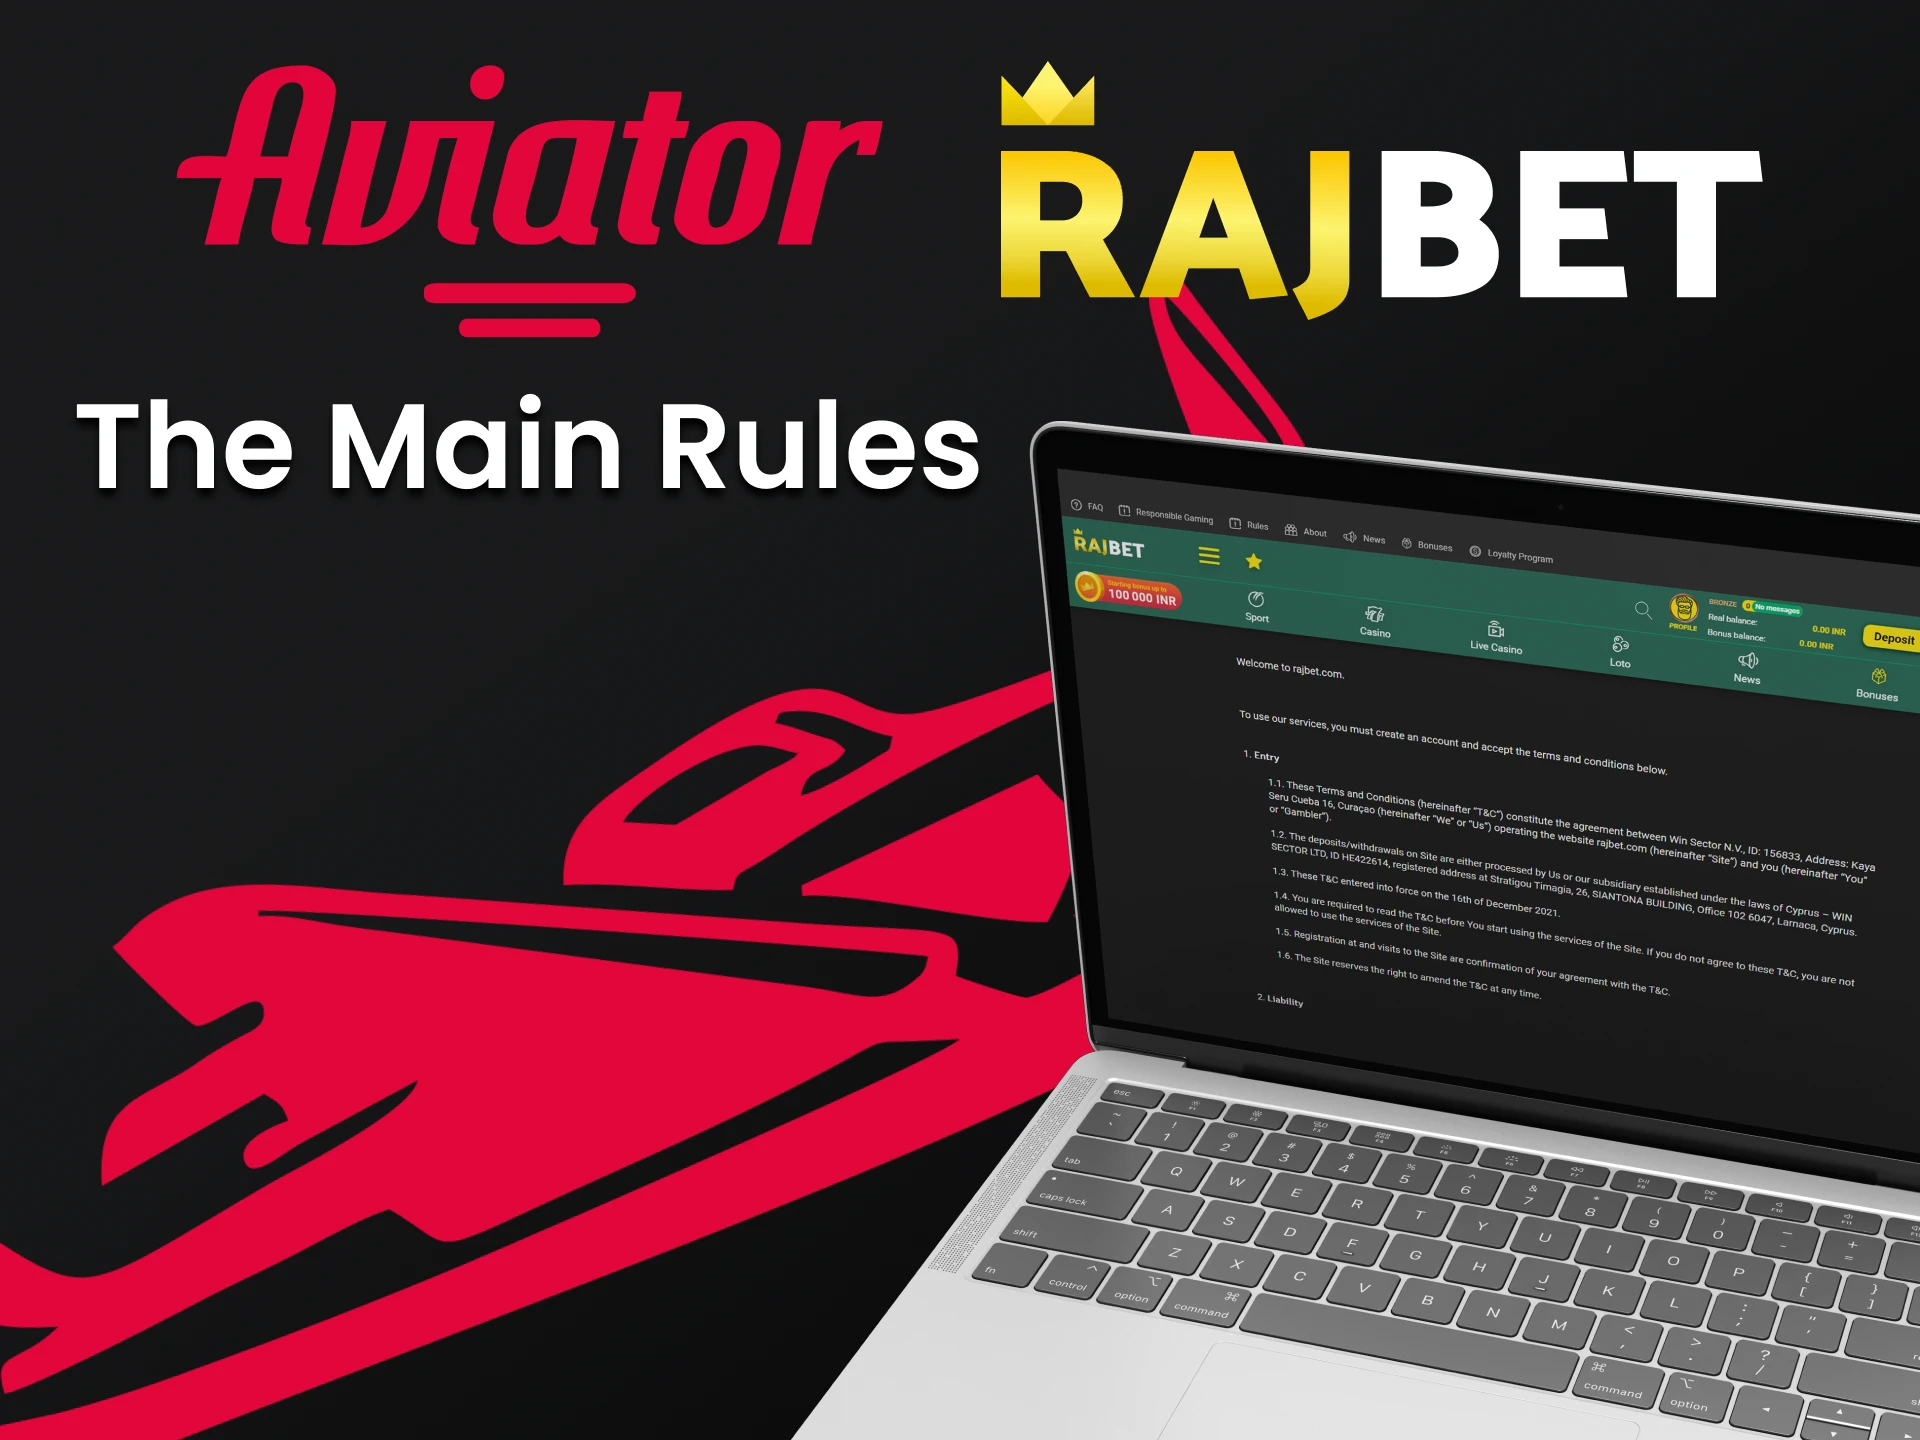 Learn the rules for using the Rajbet service.